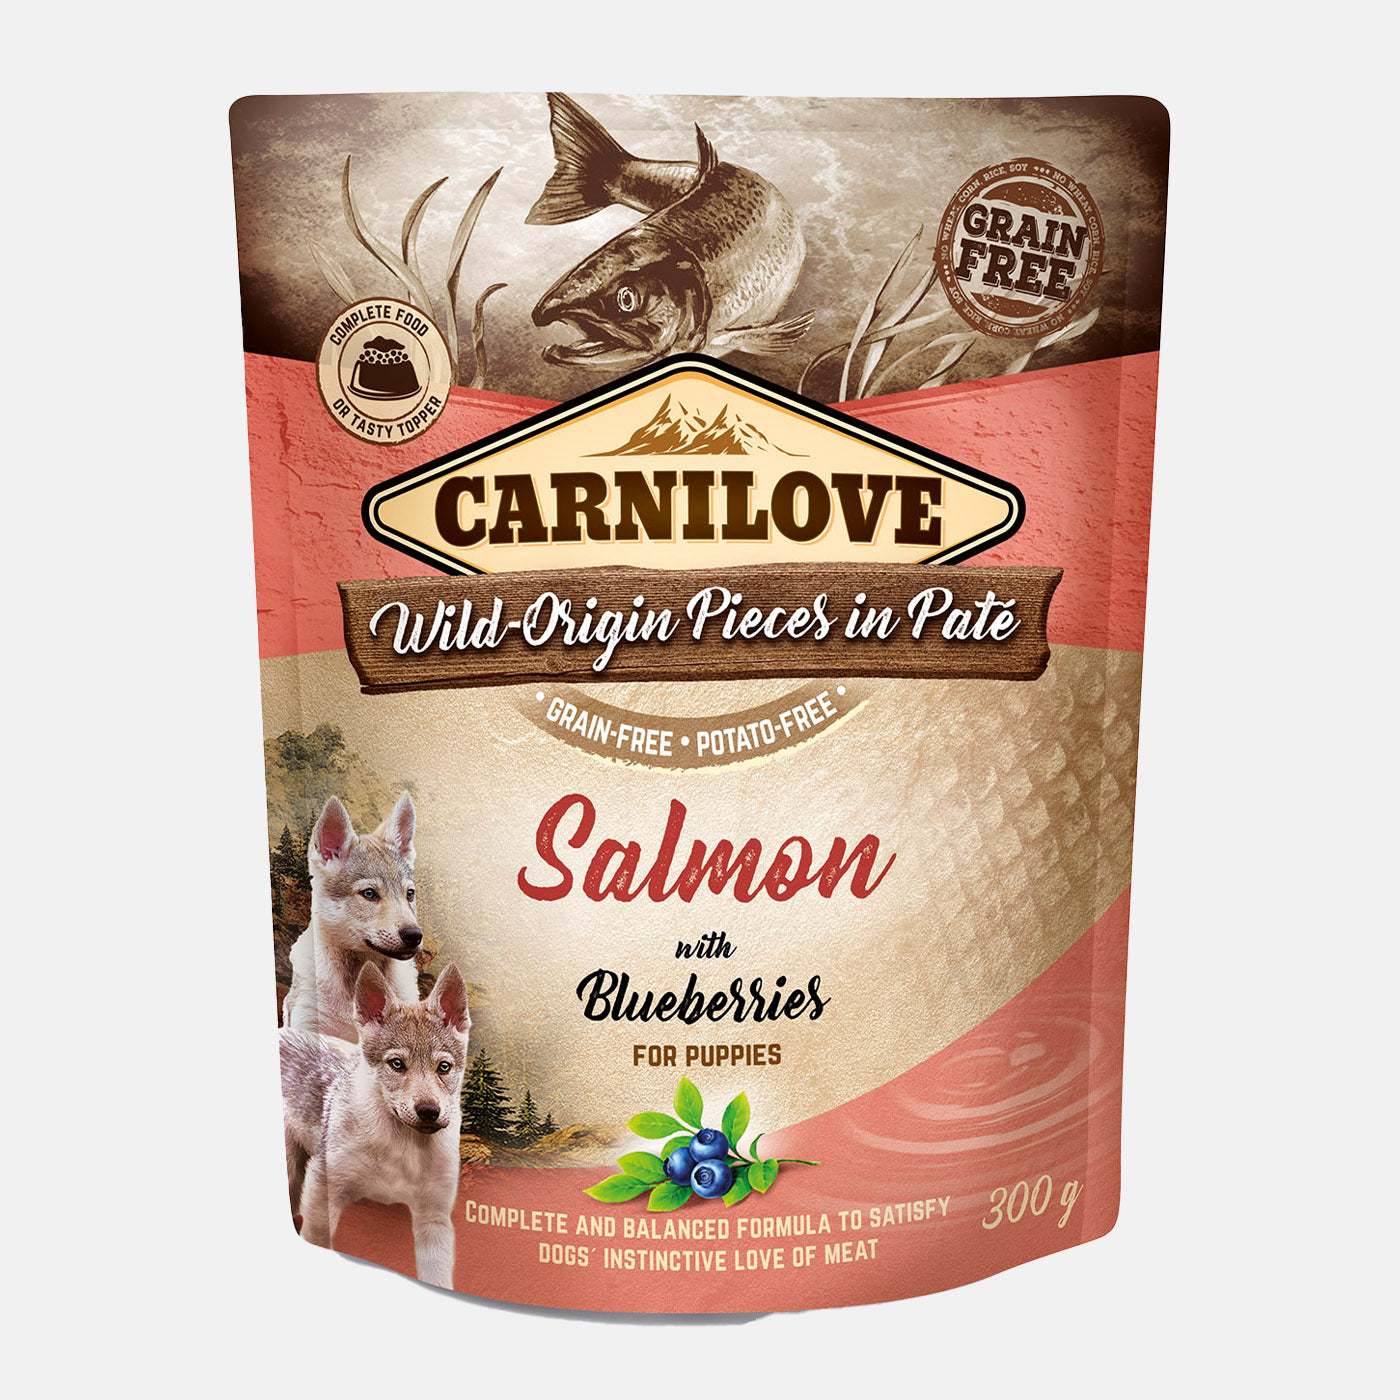 Carnilove Salmon with Blueberries Puppy Food (12x300g)